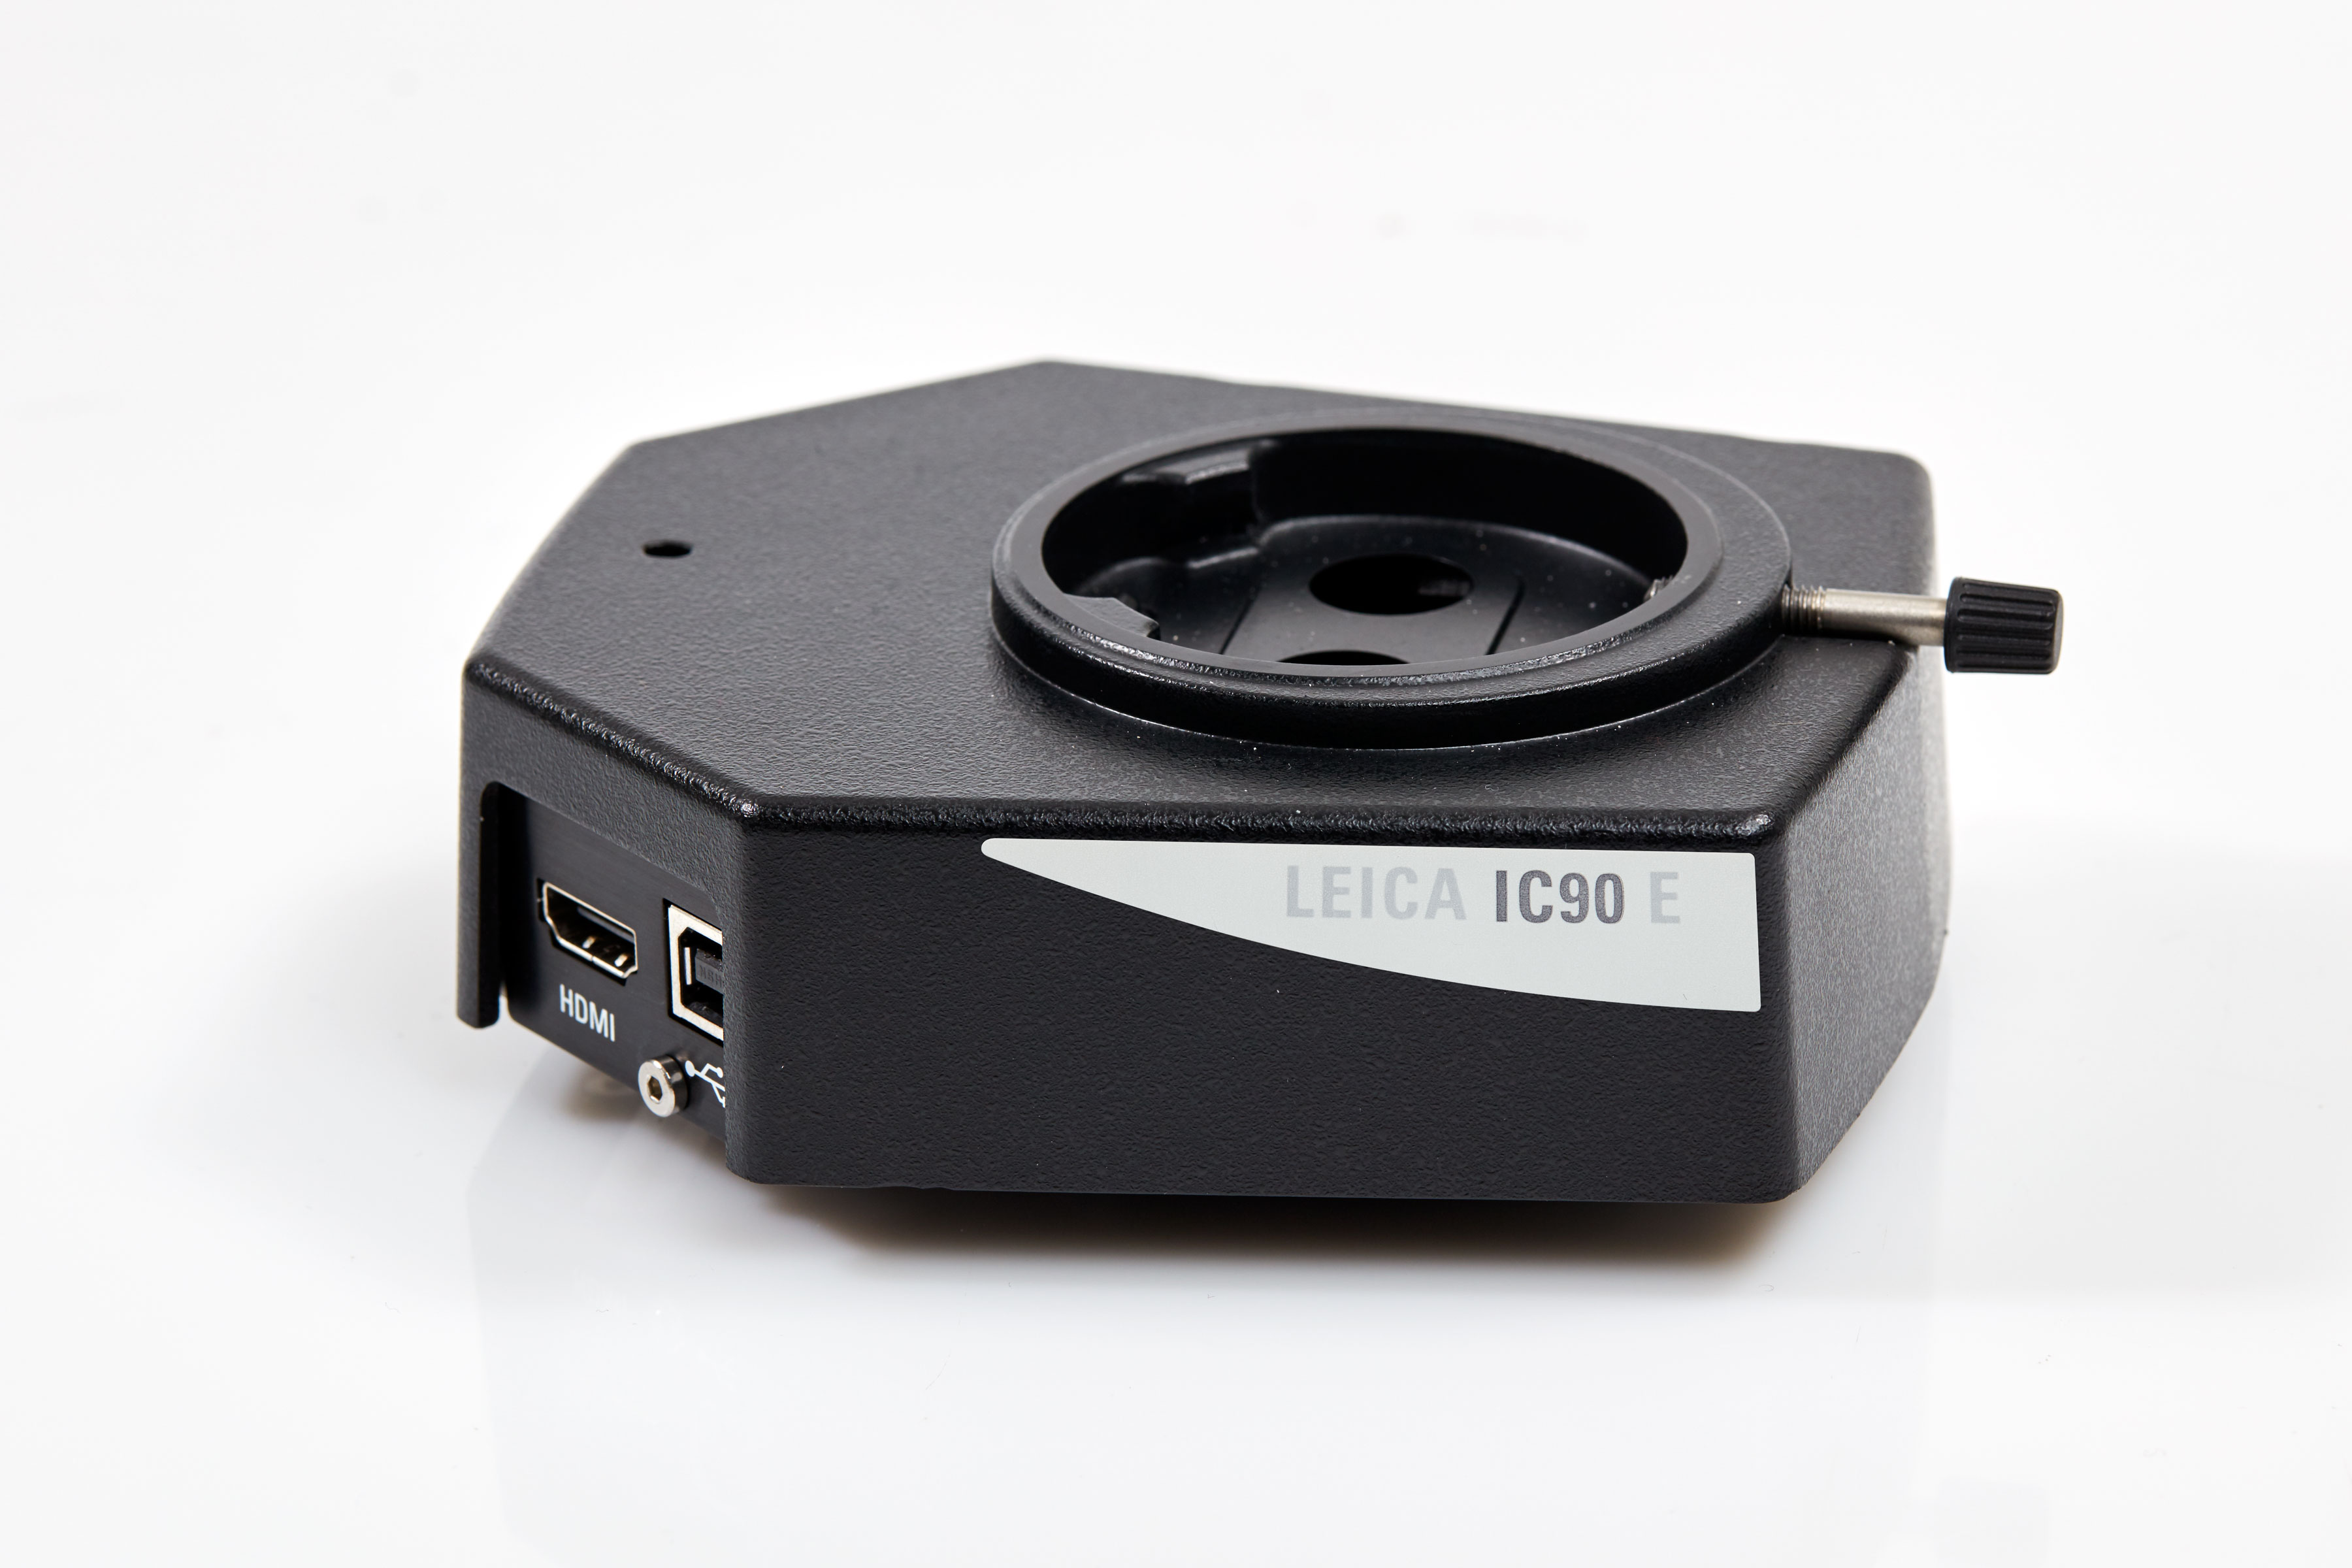 Microscope camera with ethernet connection and 10 MP resolution